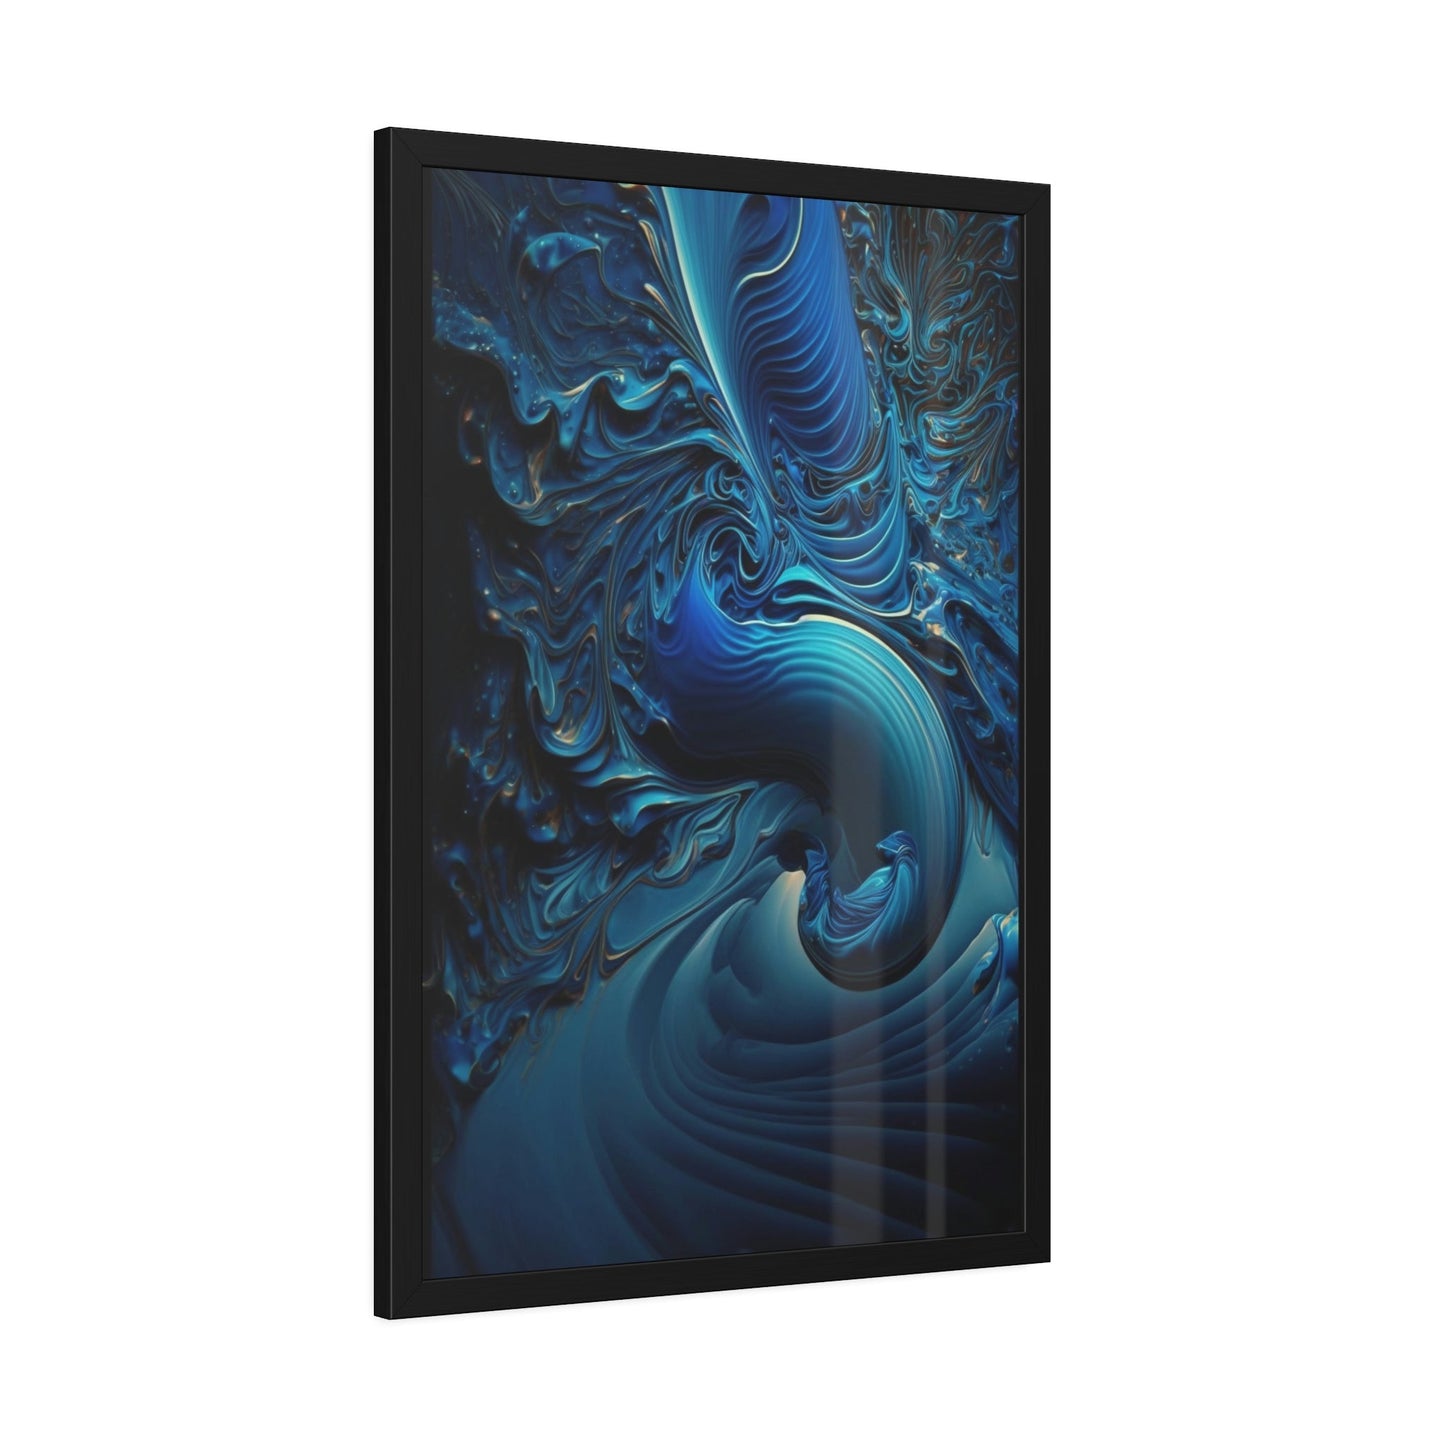 Into the Blue: Gorgeous Blue Themed Canvas Art for Your Home or Office